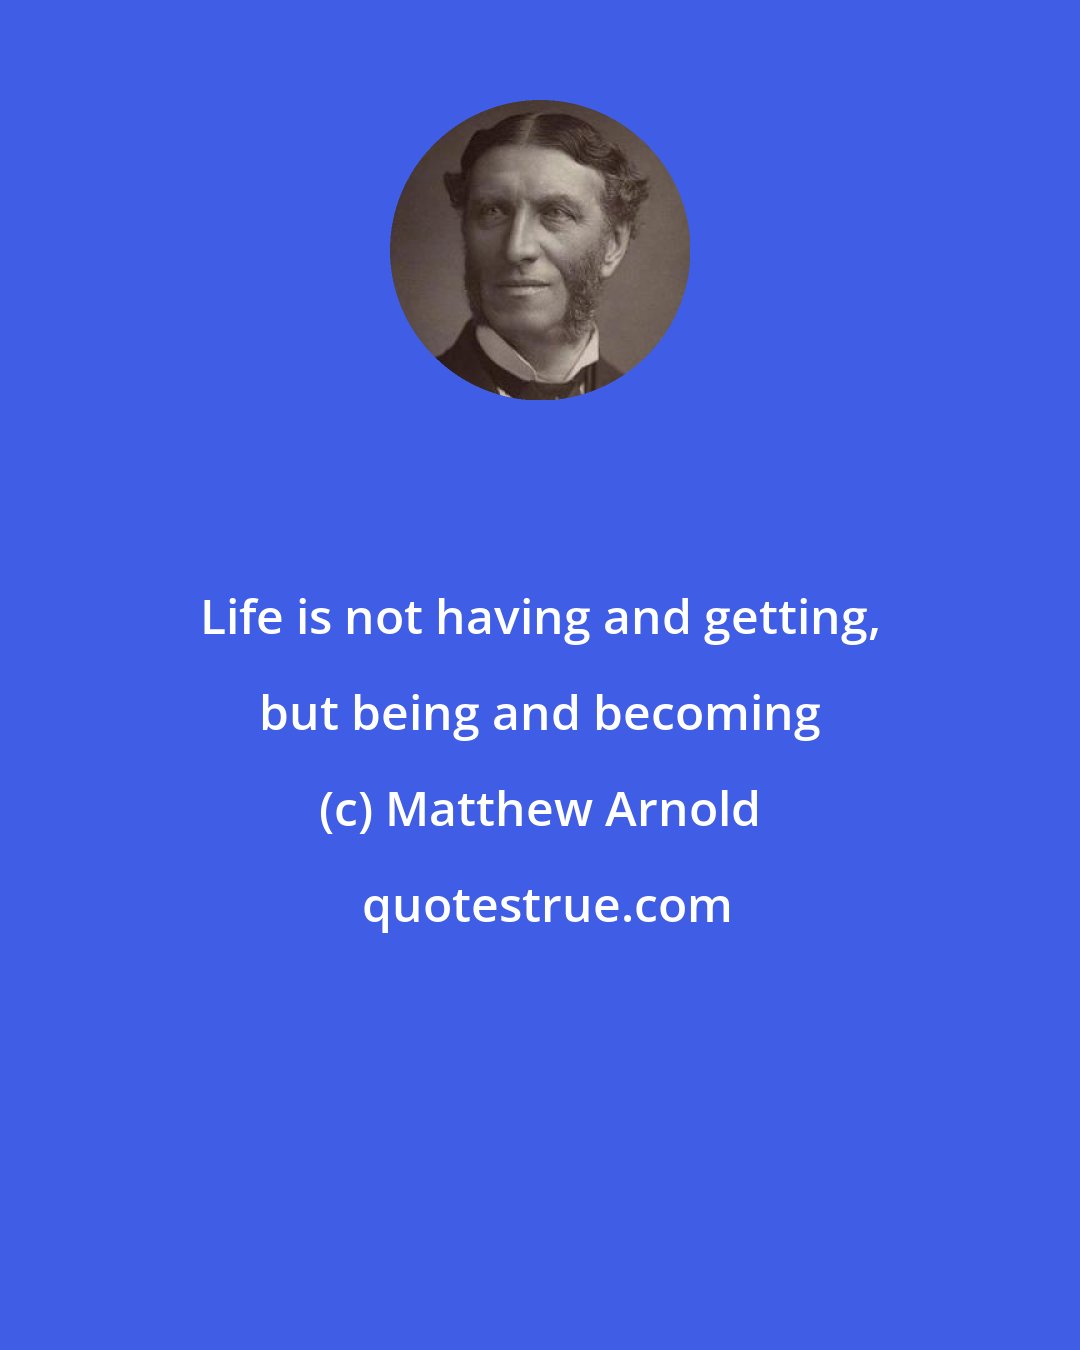 Matthew Arnold: Life is not having and getting, but being and becoming